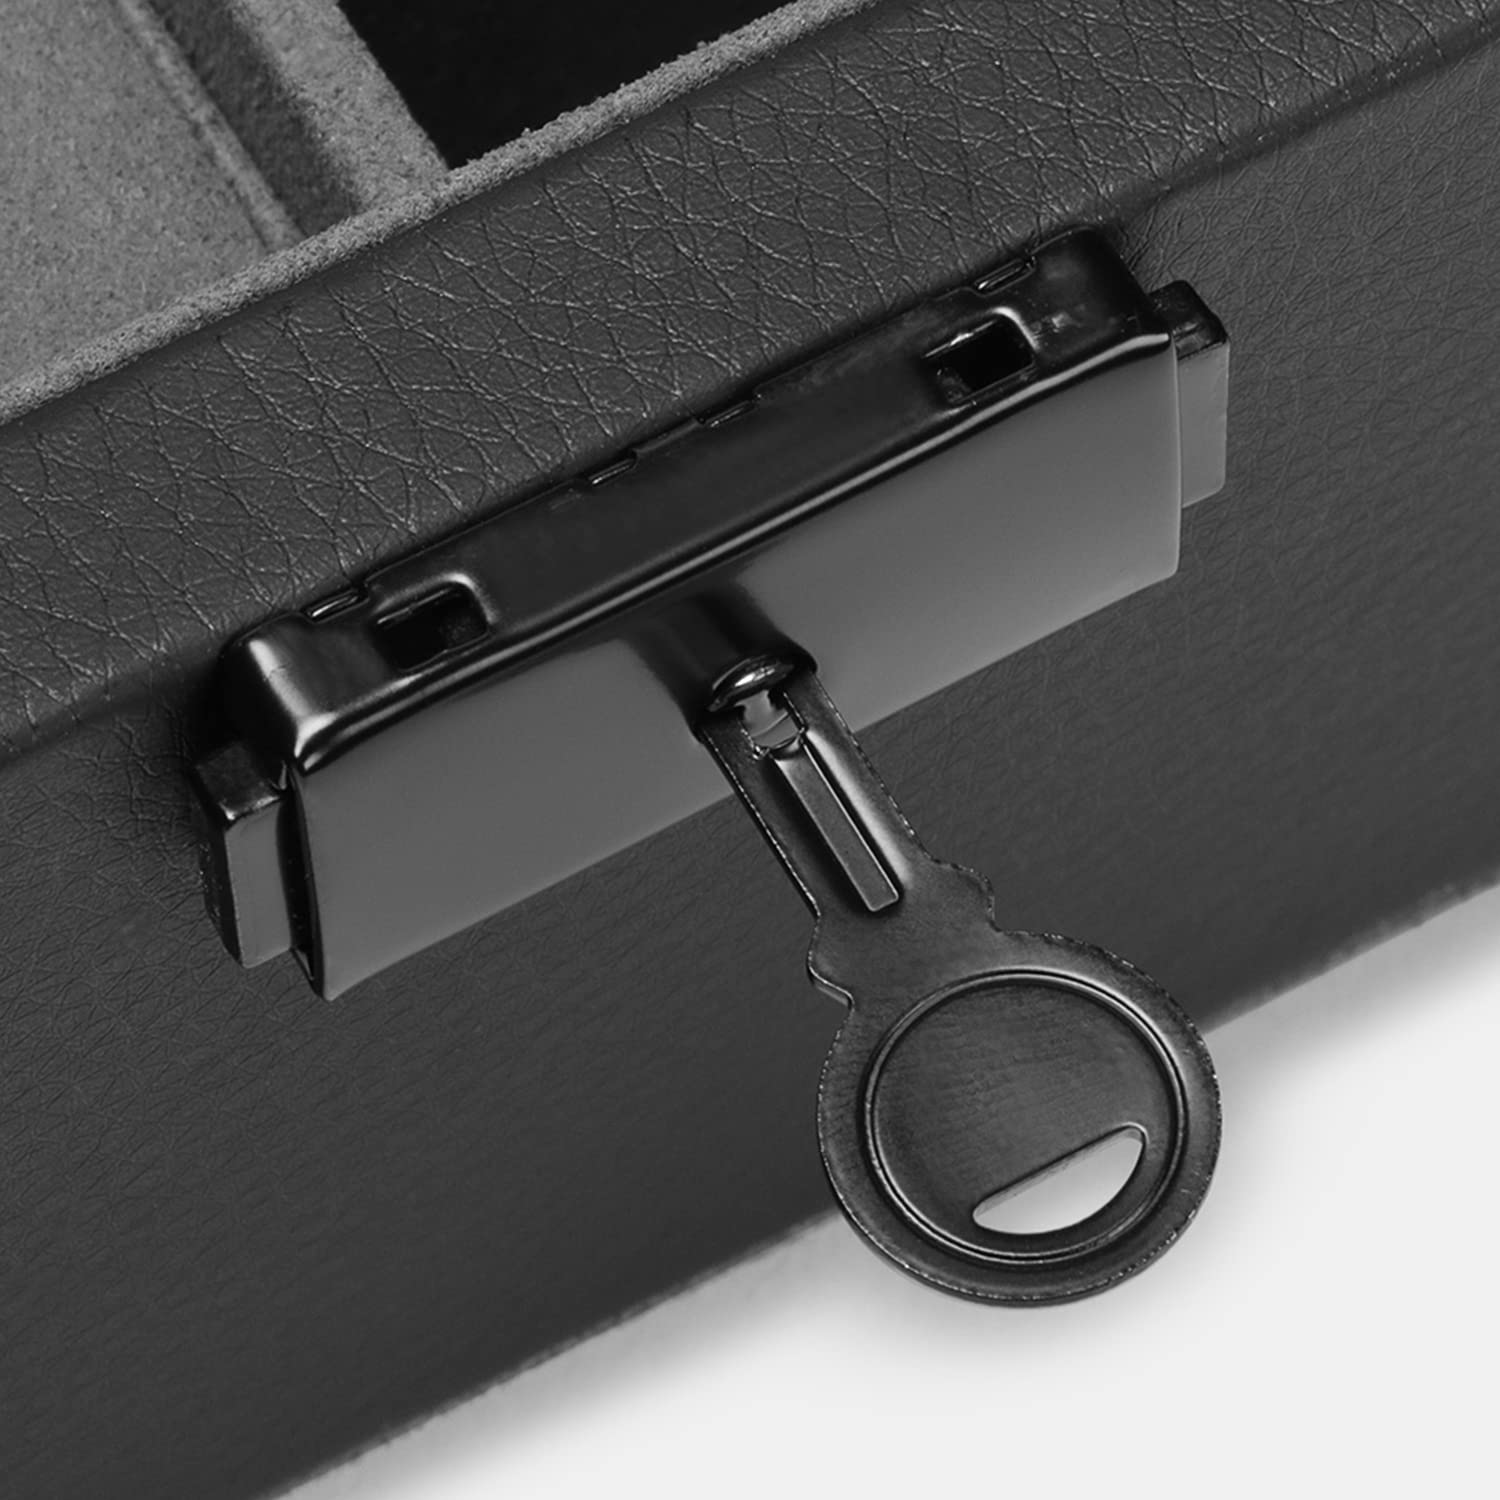 Kaviso Cache Display Valet - EDC, Blade, Watch, and Jewelry Locking Storage Case, USB Pass-through, Microfiber Lining, Faux Leather, Stackable (Valet) Black